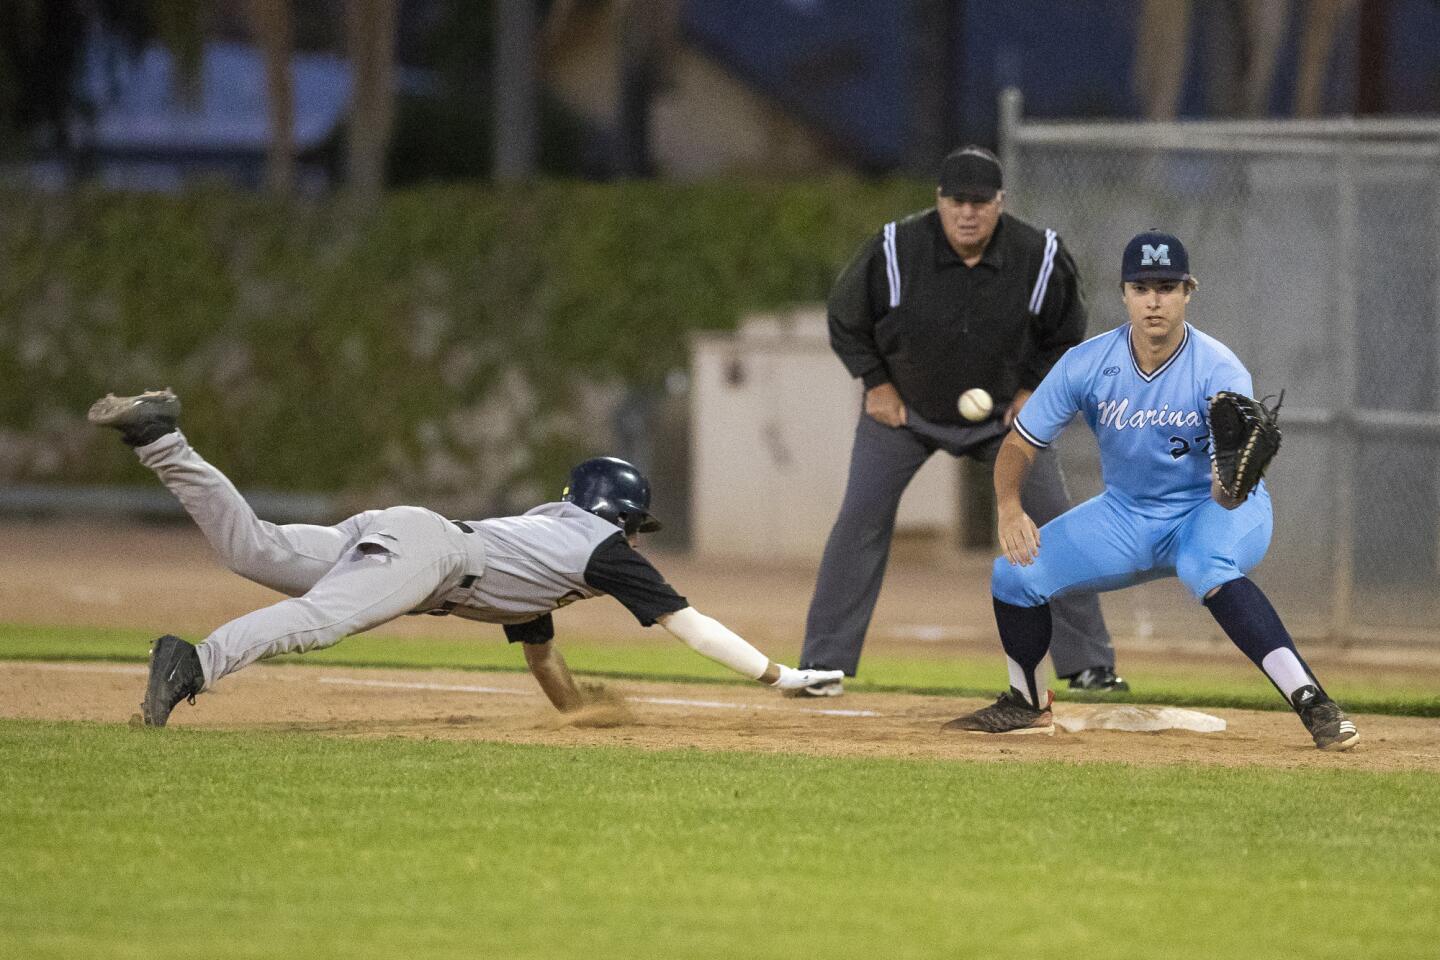 Marina's Cory Lewis, representing the North, takes the throw to keep Capistrano Valley's Lance Gardiner at first base during the Kiwanis Club of Greater Anaheim's 52nd Orange County High School All-Star Baseball Game for seniors at La Palma Park's Dee Fee Field in Anaheim on Tuesday.